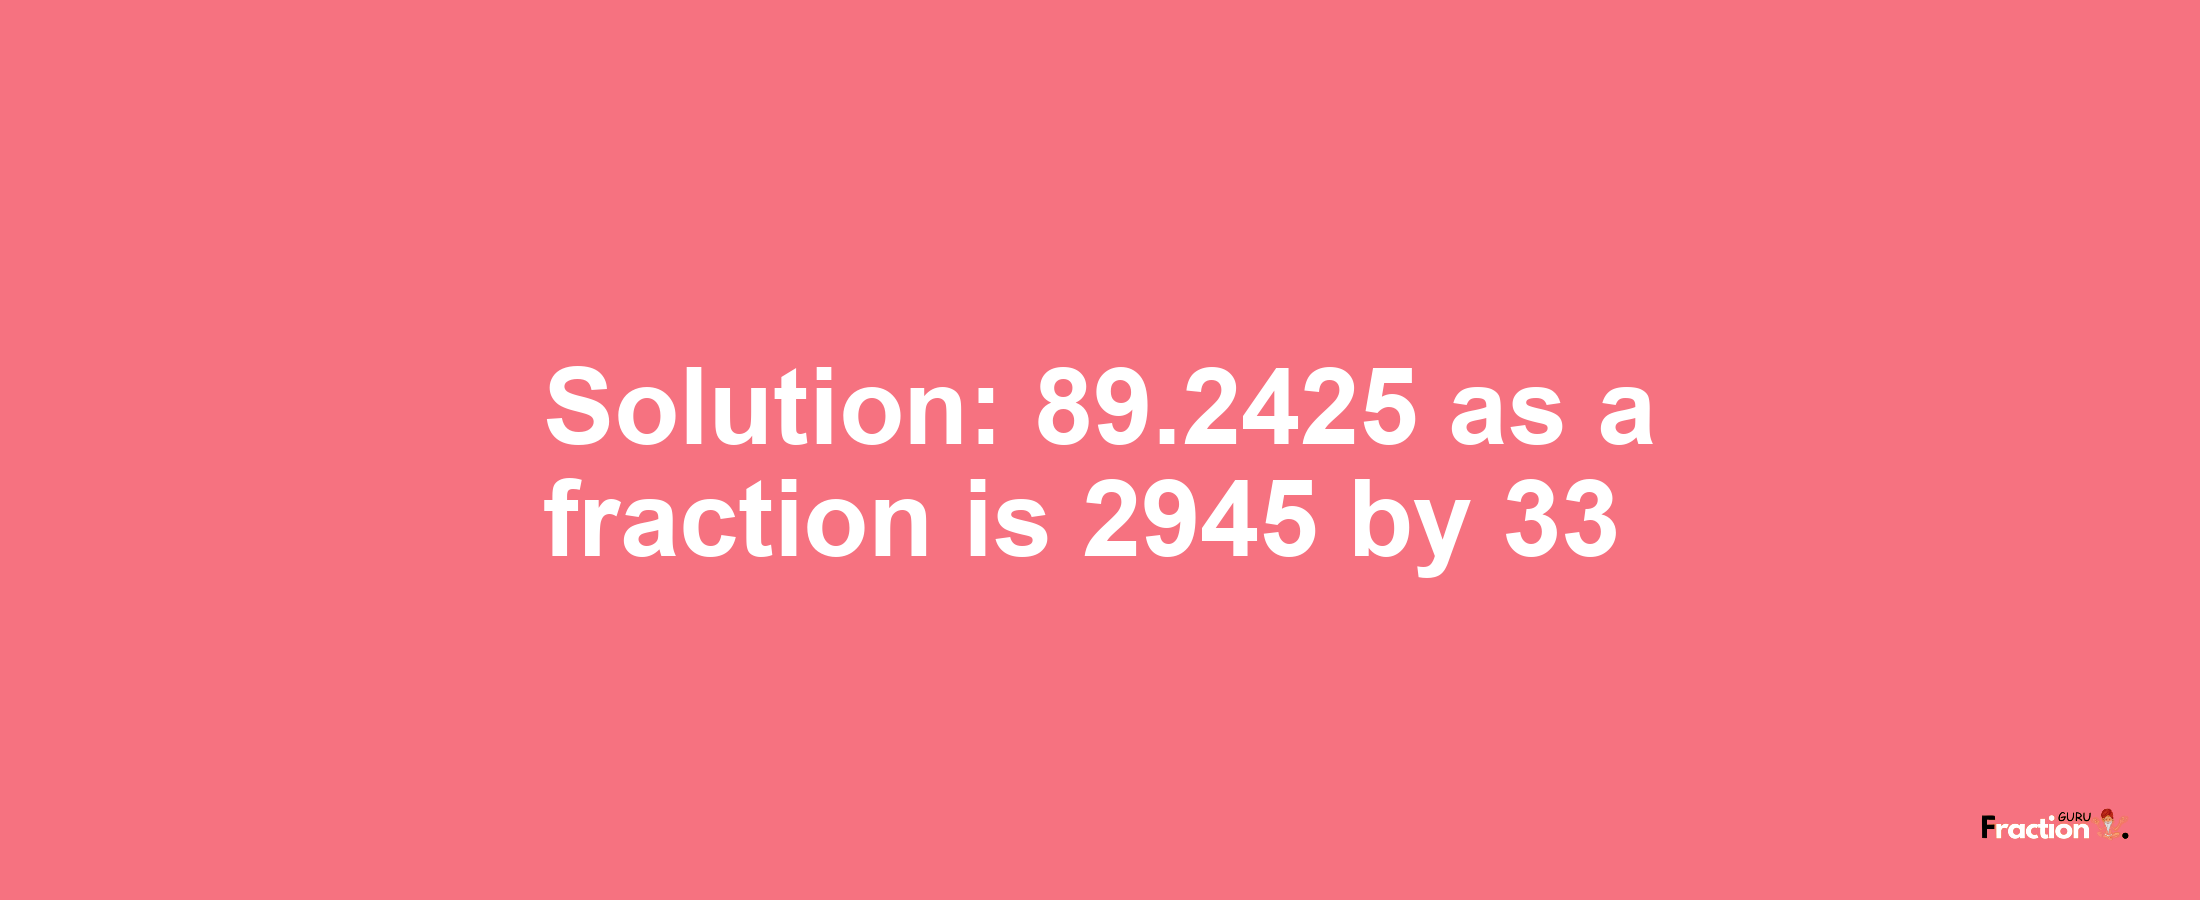 Solution:89.2425 as a fraction is 2945/33